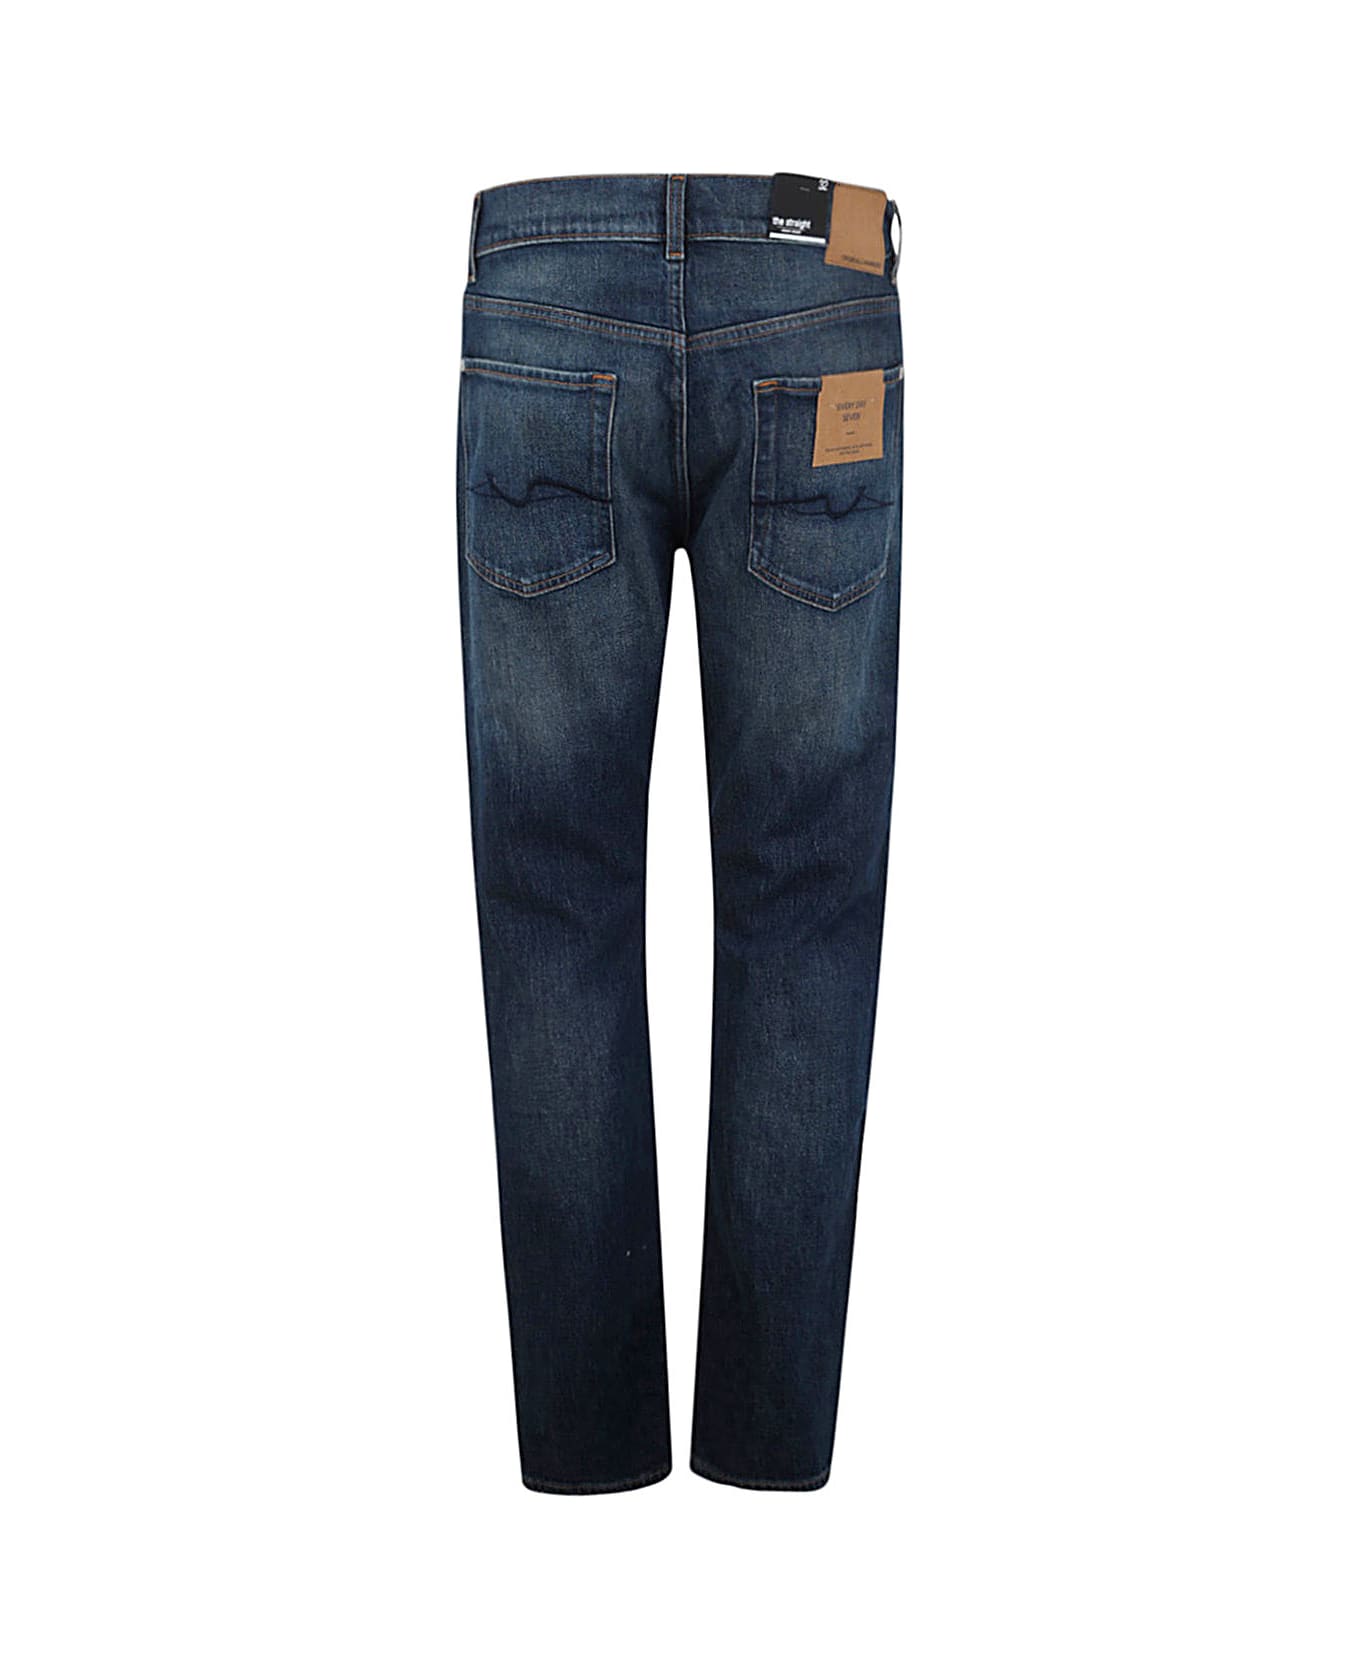 7 For All Mankind The Straight Upgrade Jeans - Dark Blue